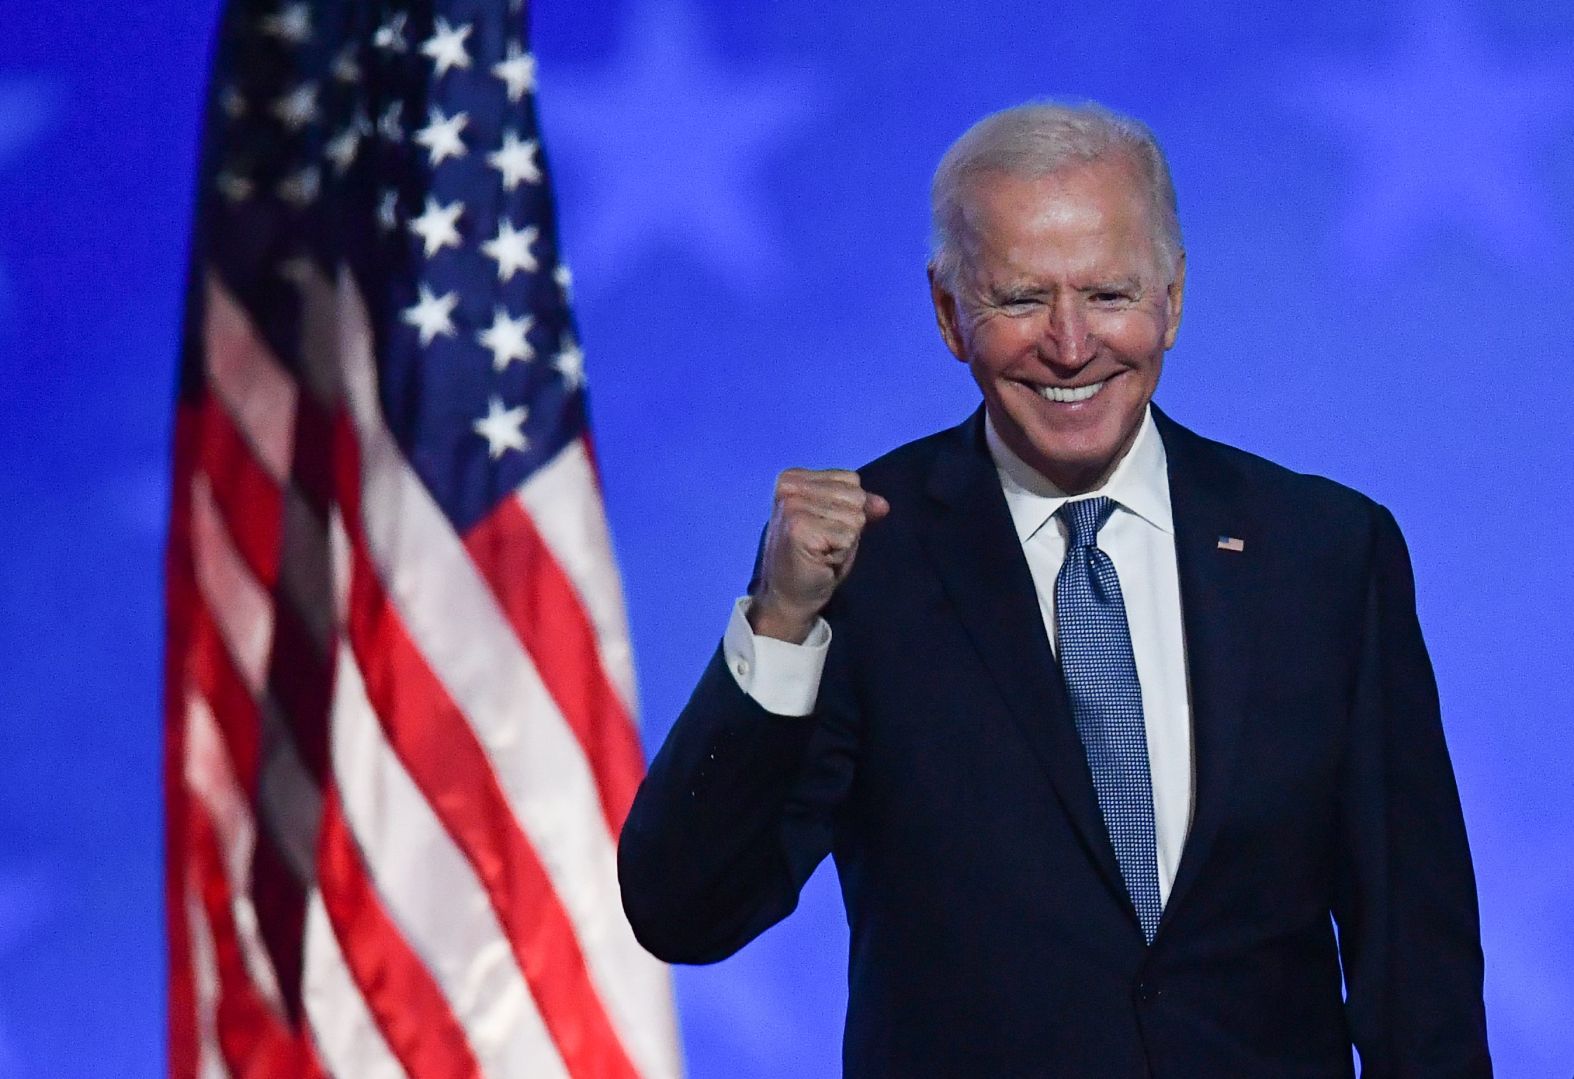 As President Joe Biden embarks on his reelection campaign, it's time to acknowledge the obvious: The Democrat often leans to the Right.